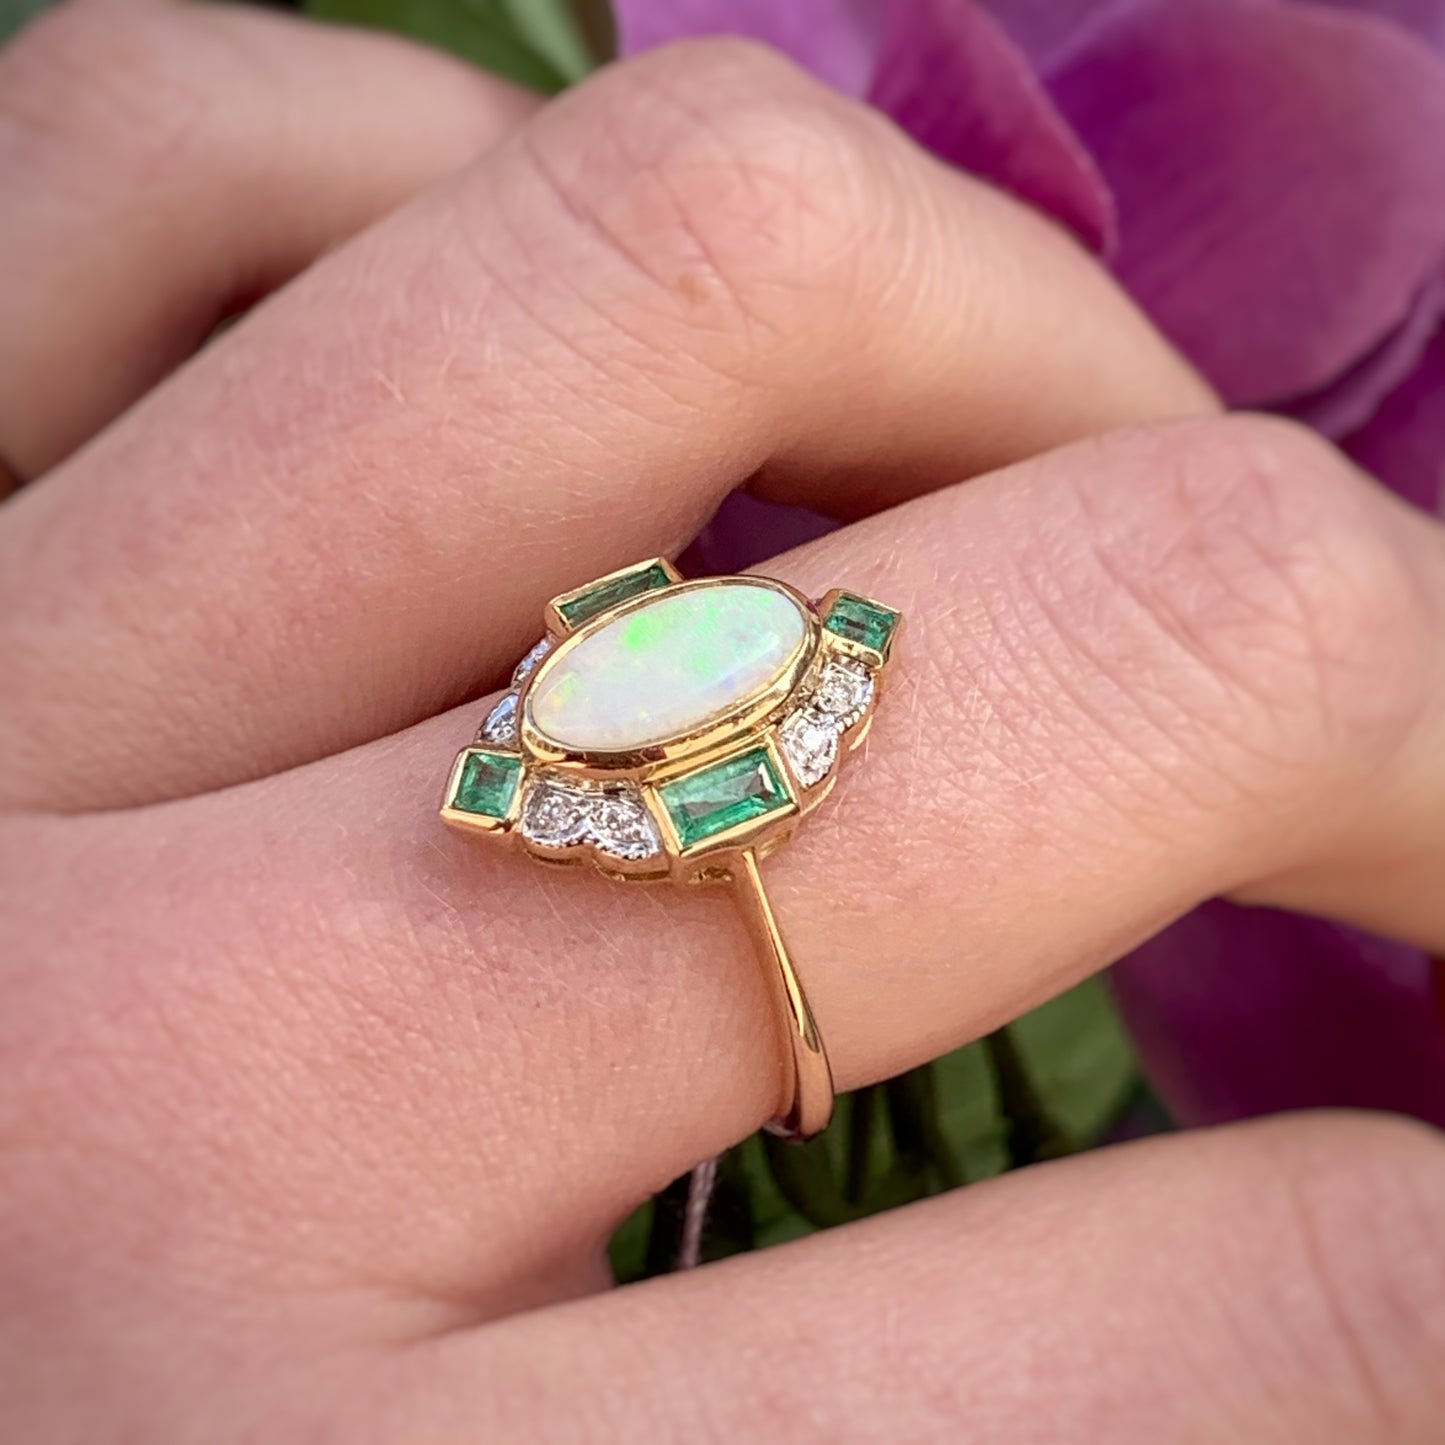 Art Deco Inspired 9ct Yellow Gold Opal Emerald And Diamond Ring - SIZE K